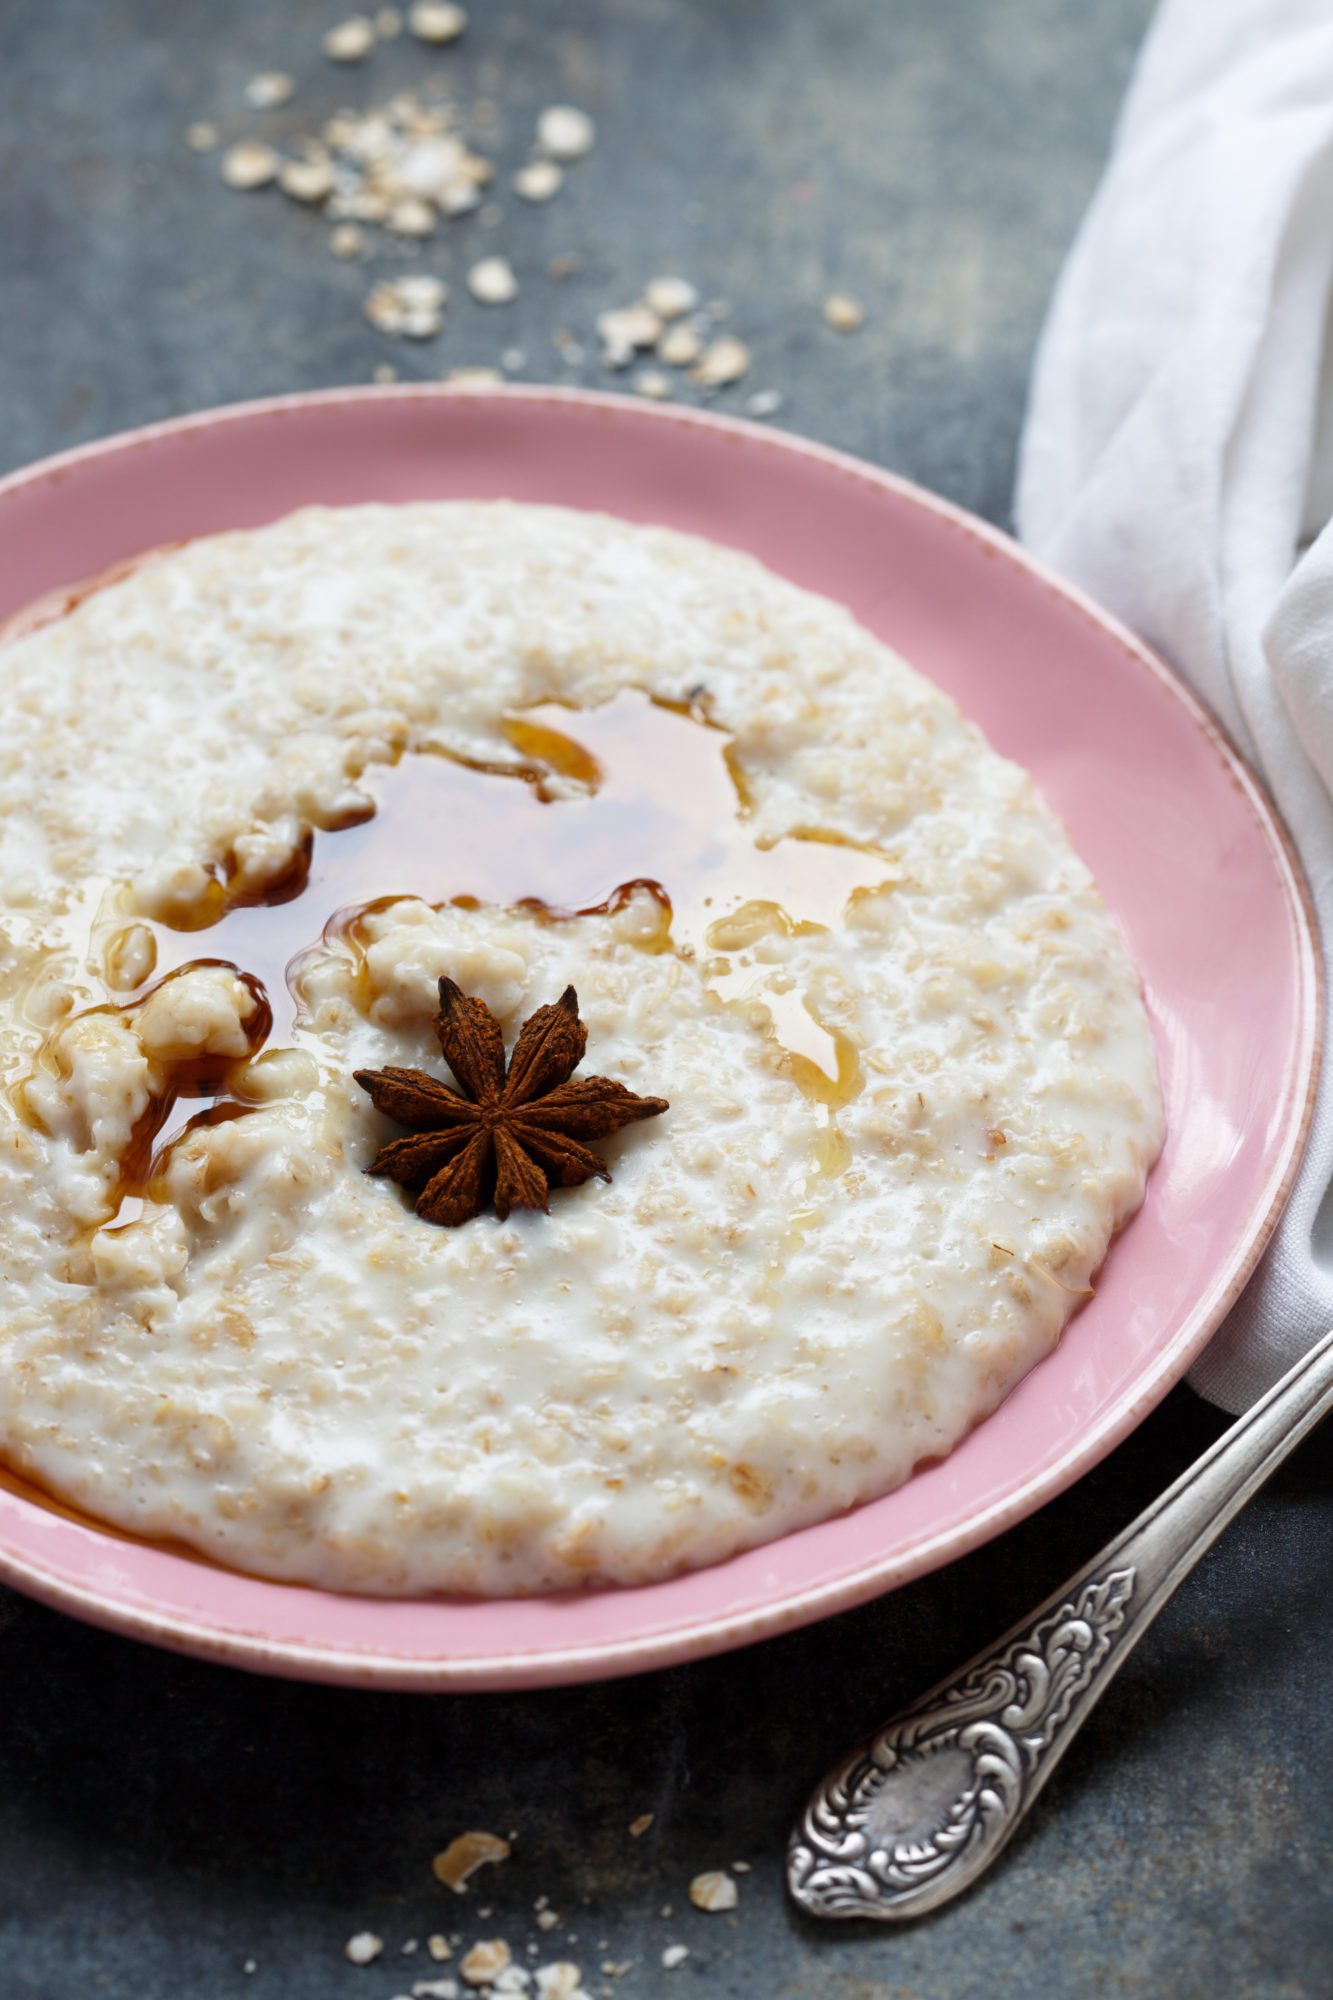 Oatmeal with maple syrup